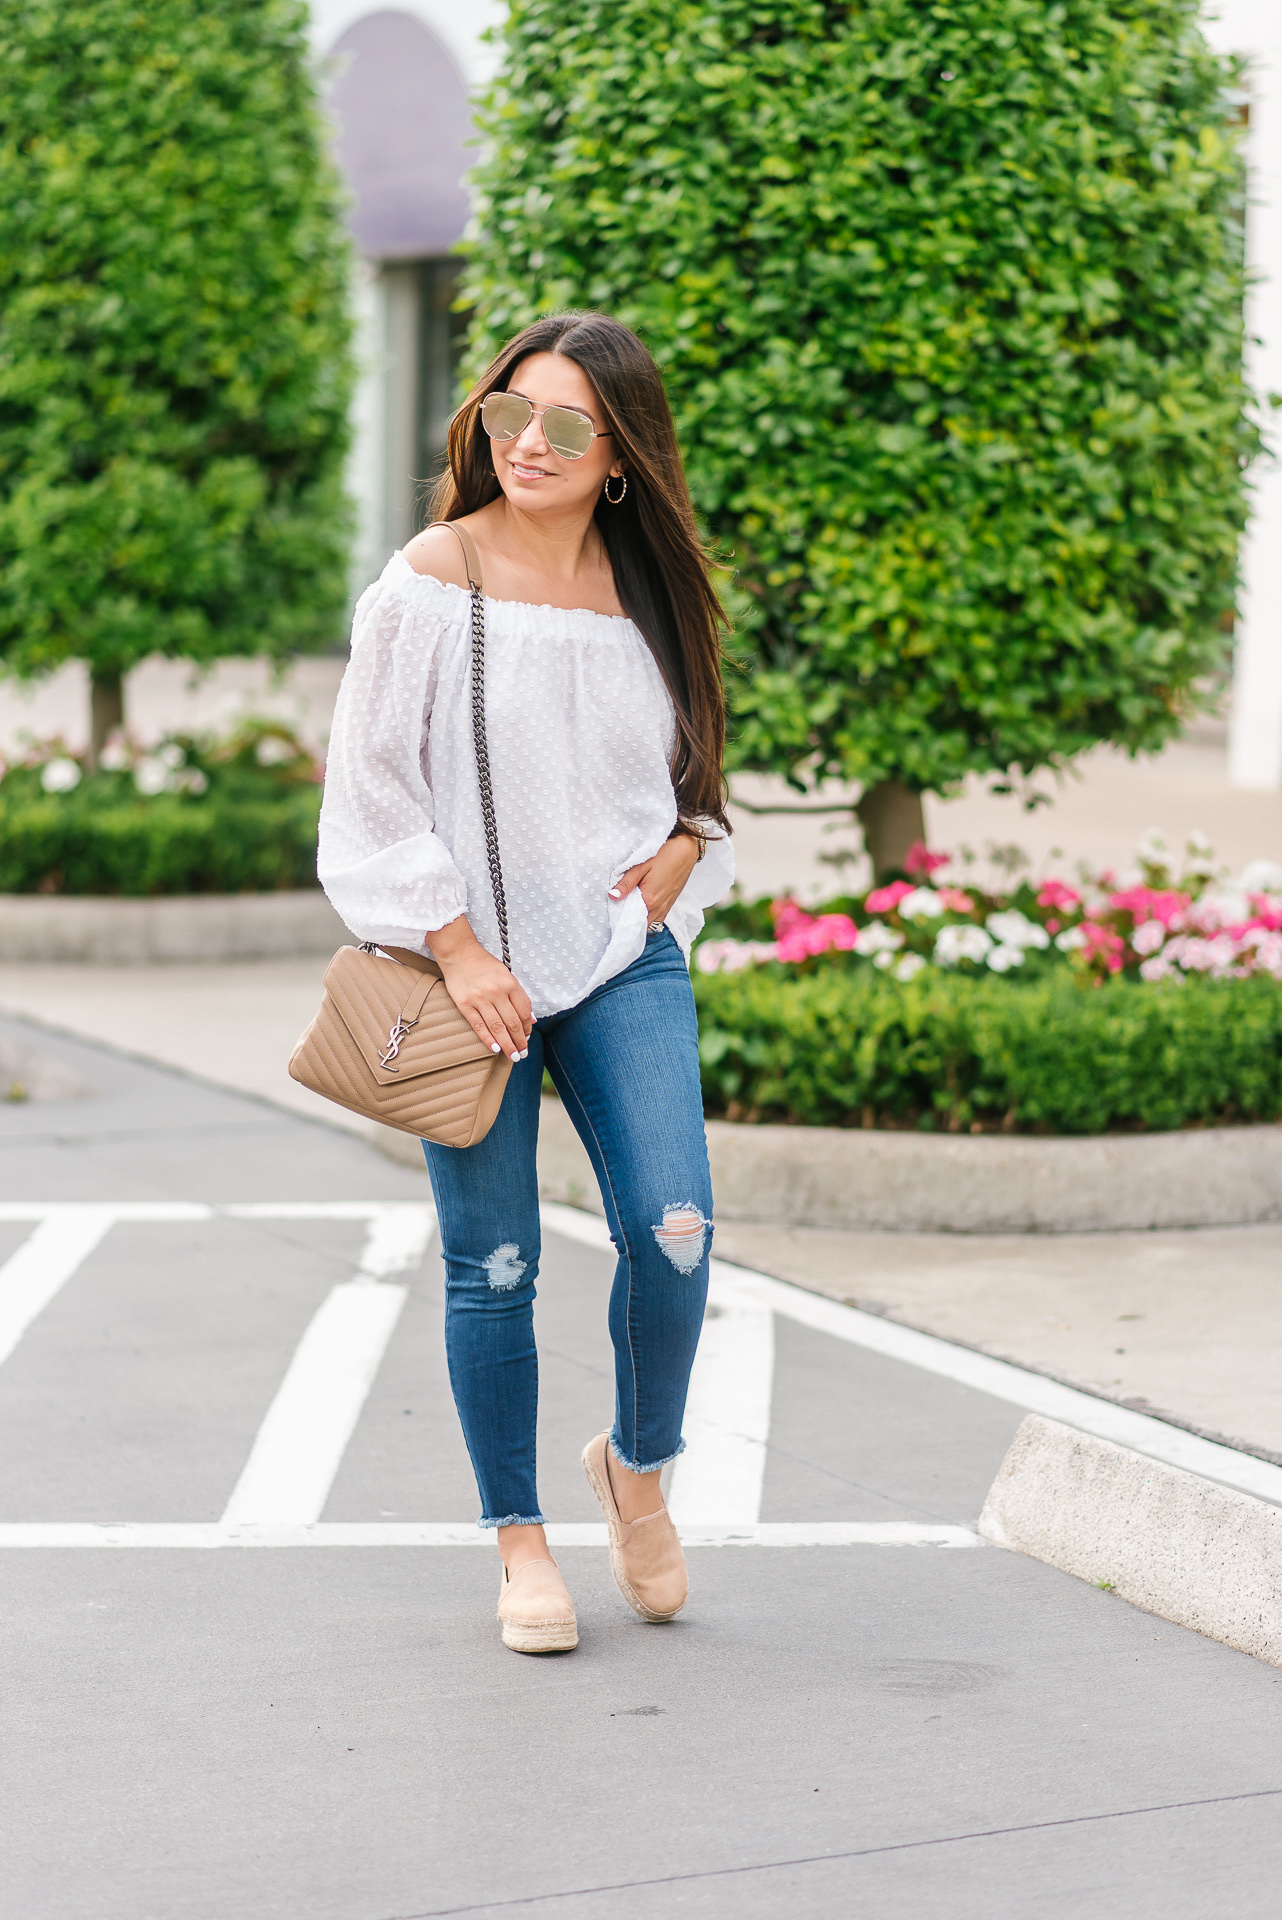 Cute and Casual Affordable Style | LuxMommy | Houston Fashion, Beauty ...